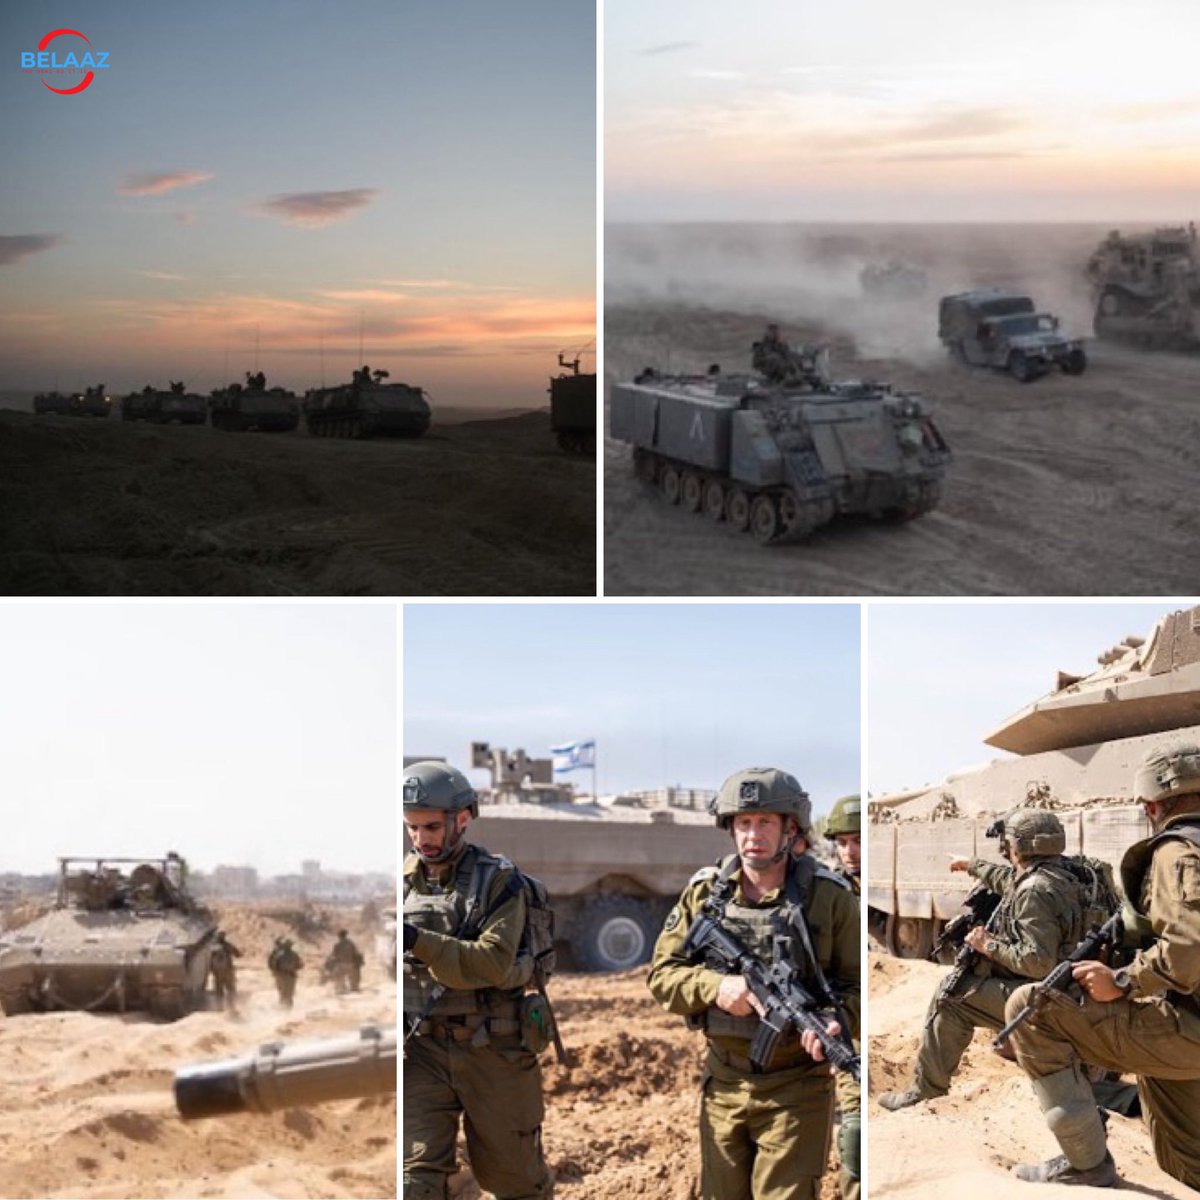 New photos released by the Israeli army which shows troops operating inside Gaza on Monday